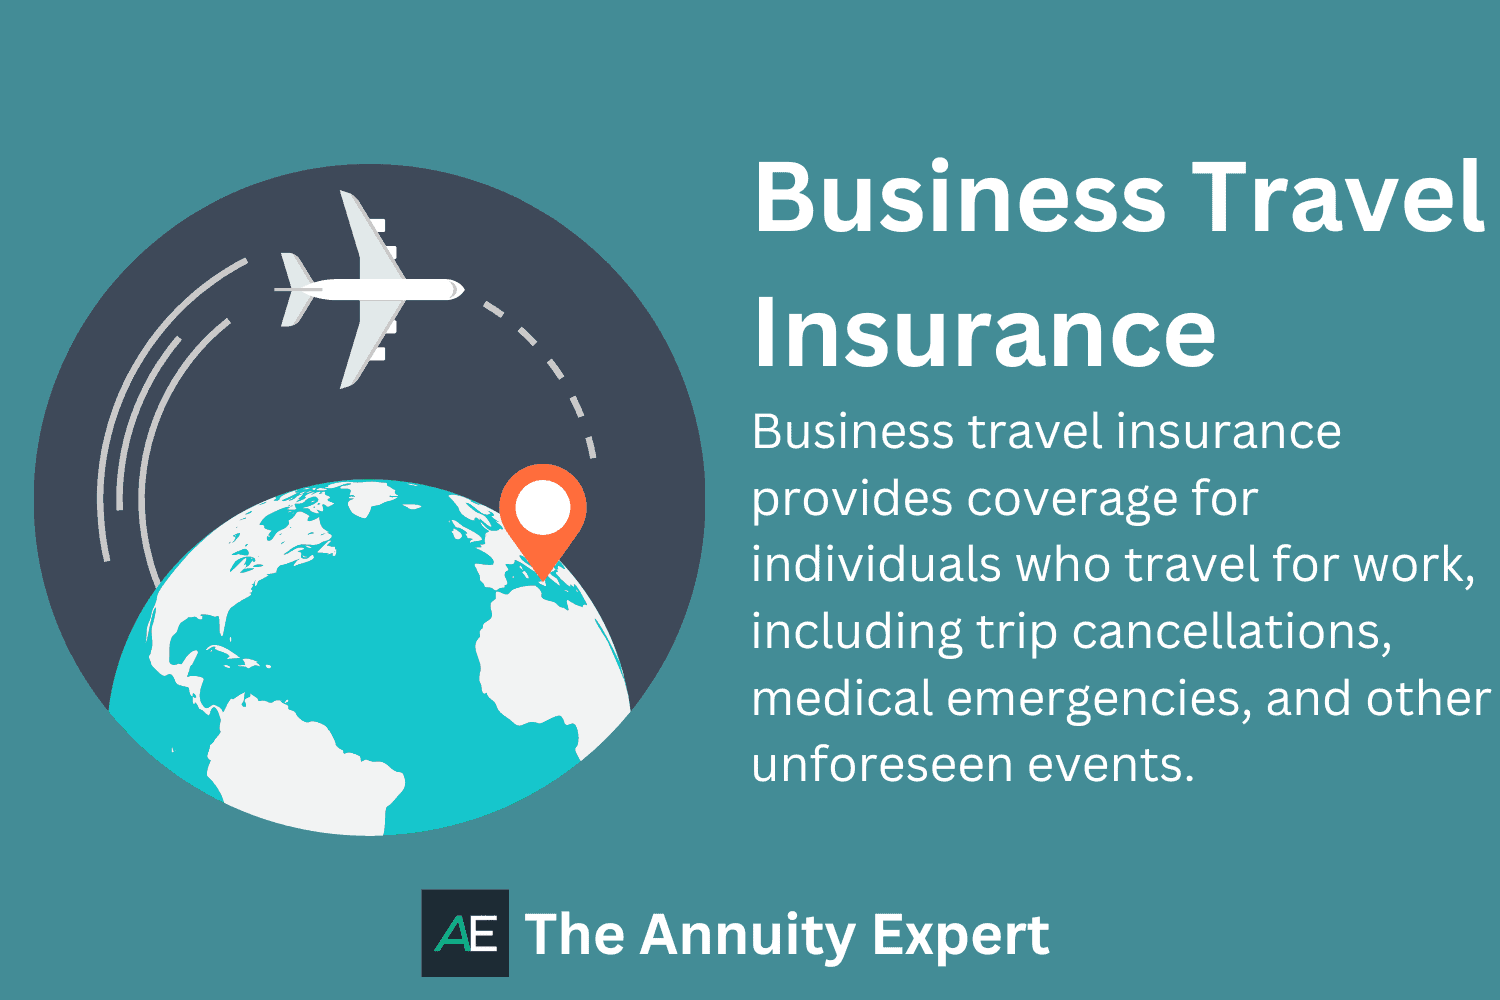 Can I get insurance for business-related travel?